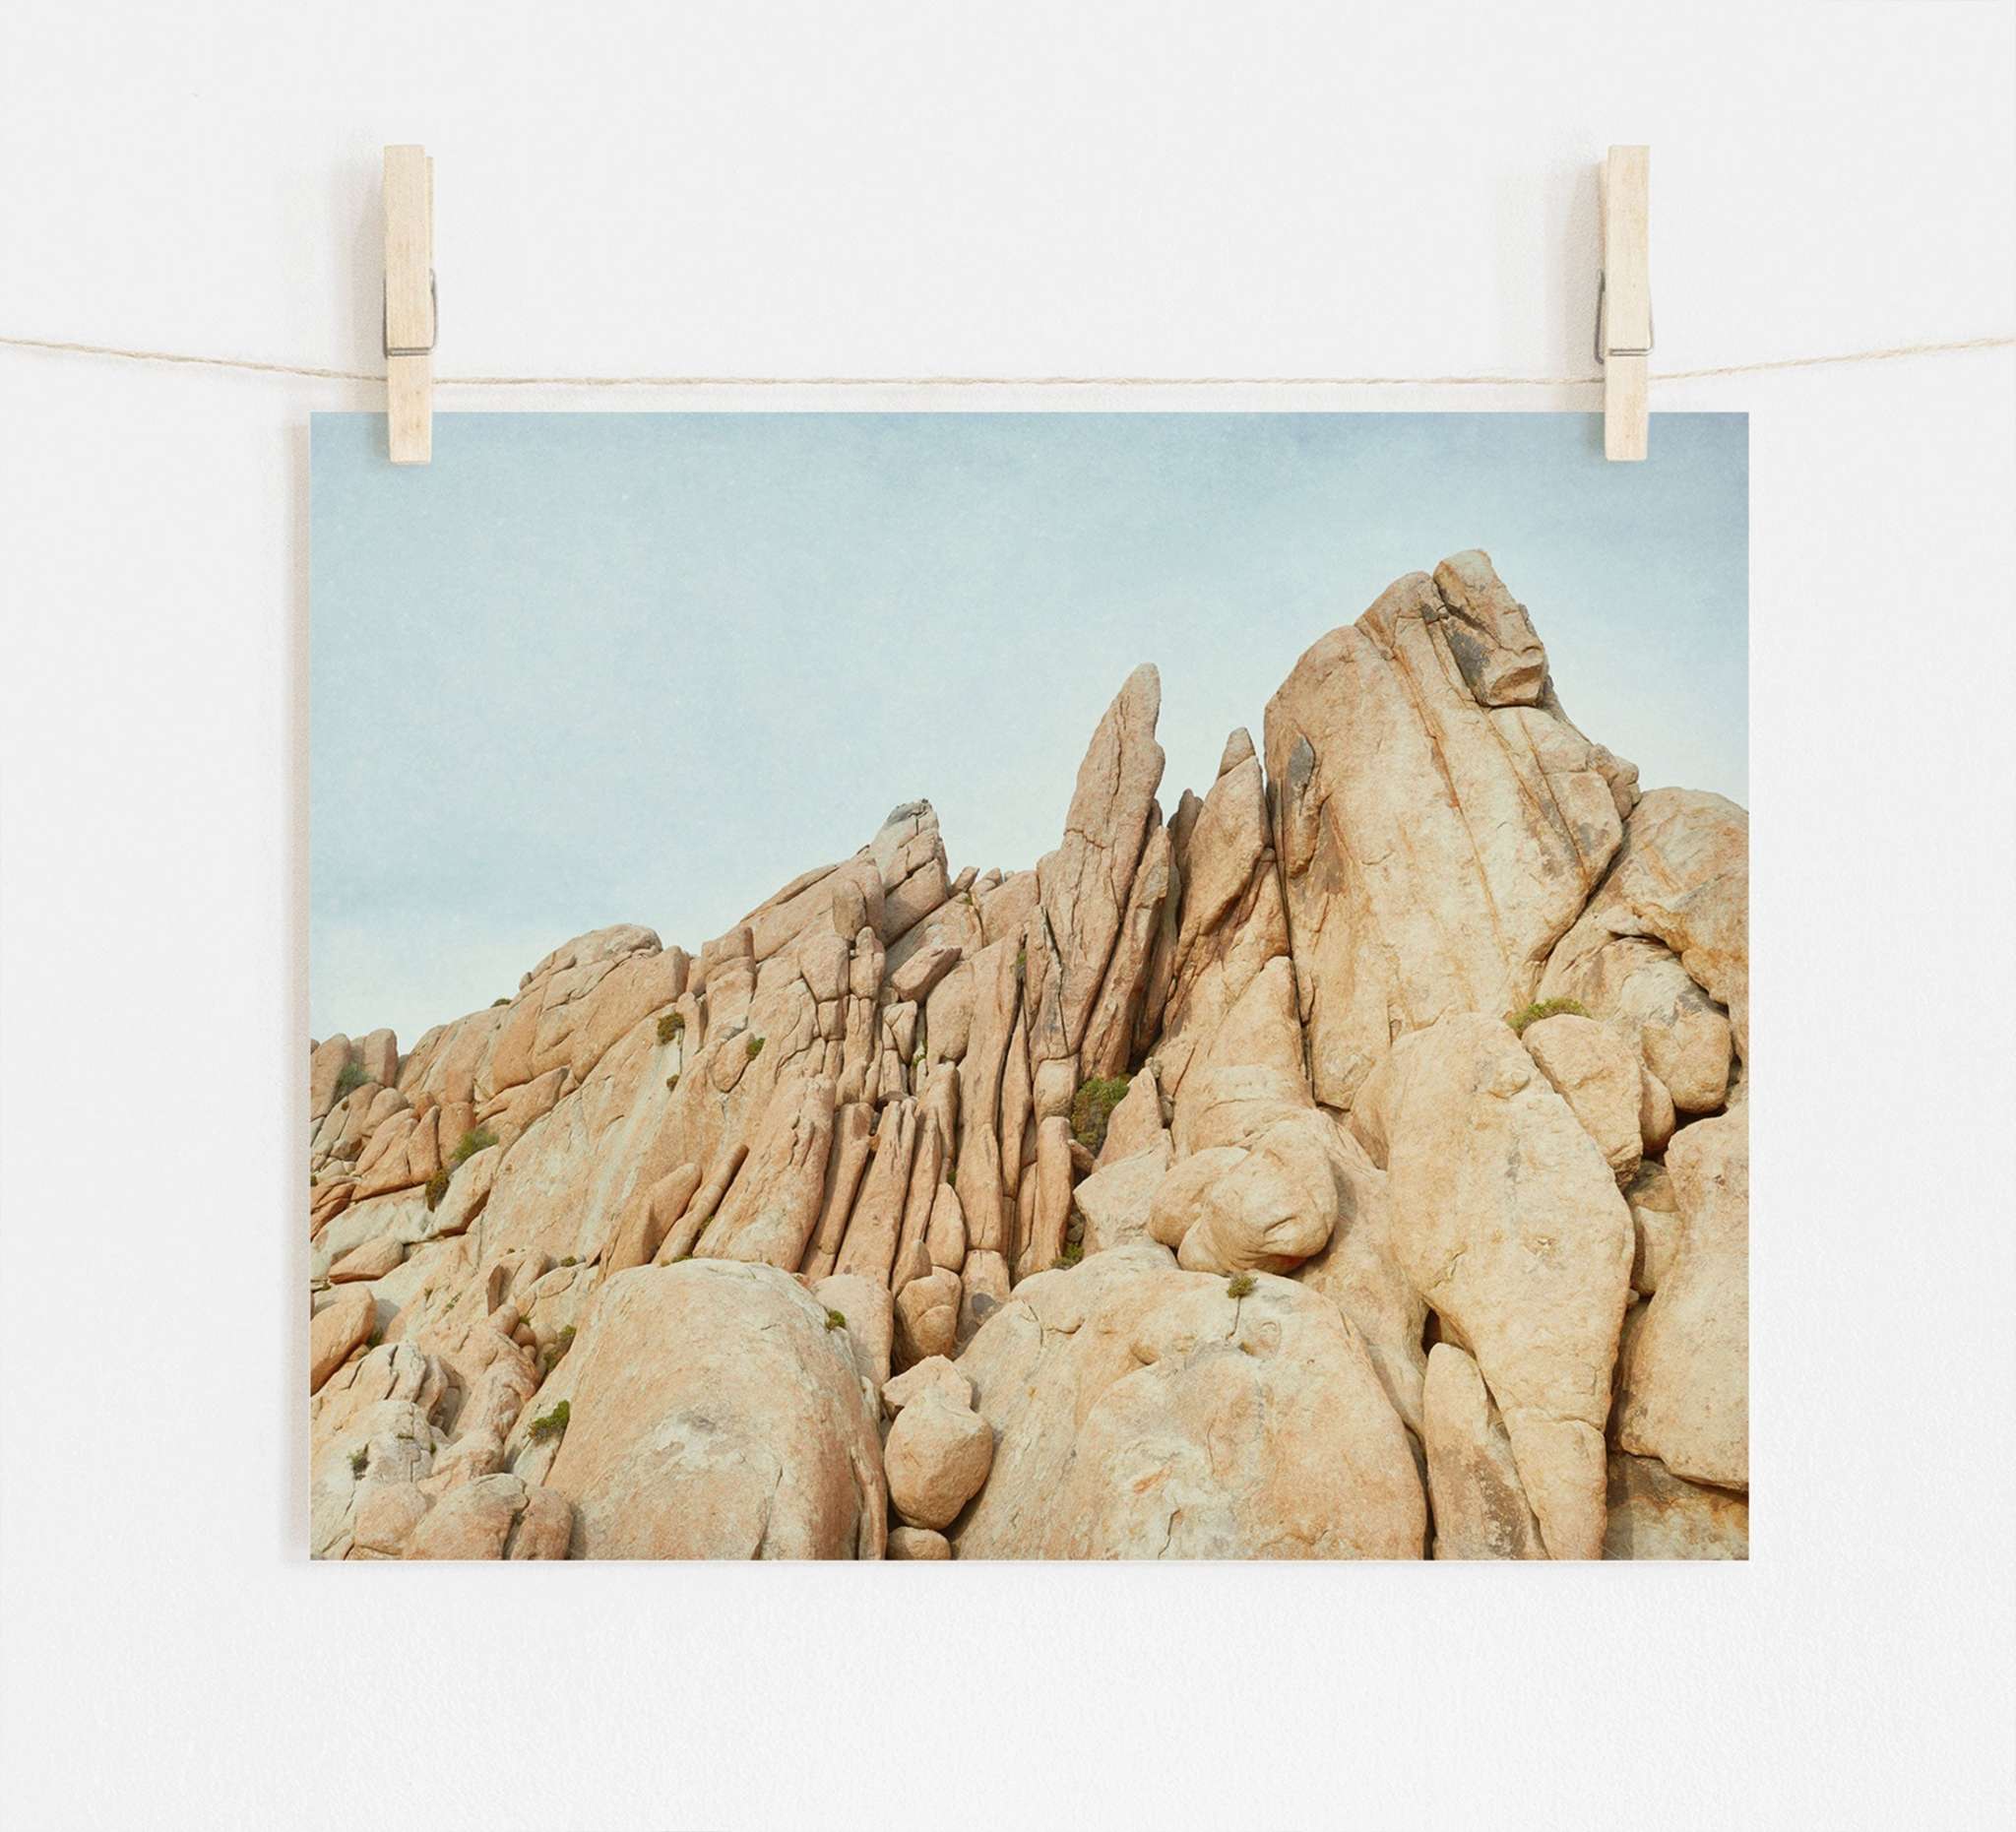 A photo of rugged, rocky cliffs with pointed formations, displayed hanging from two wooden clothespins on a string against a white wall, printed on archival photographic paper. 

Replace with: Offley Green&#39;s Joshua Tree Print, &#39;Joshua Rocks&#39;